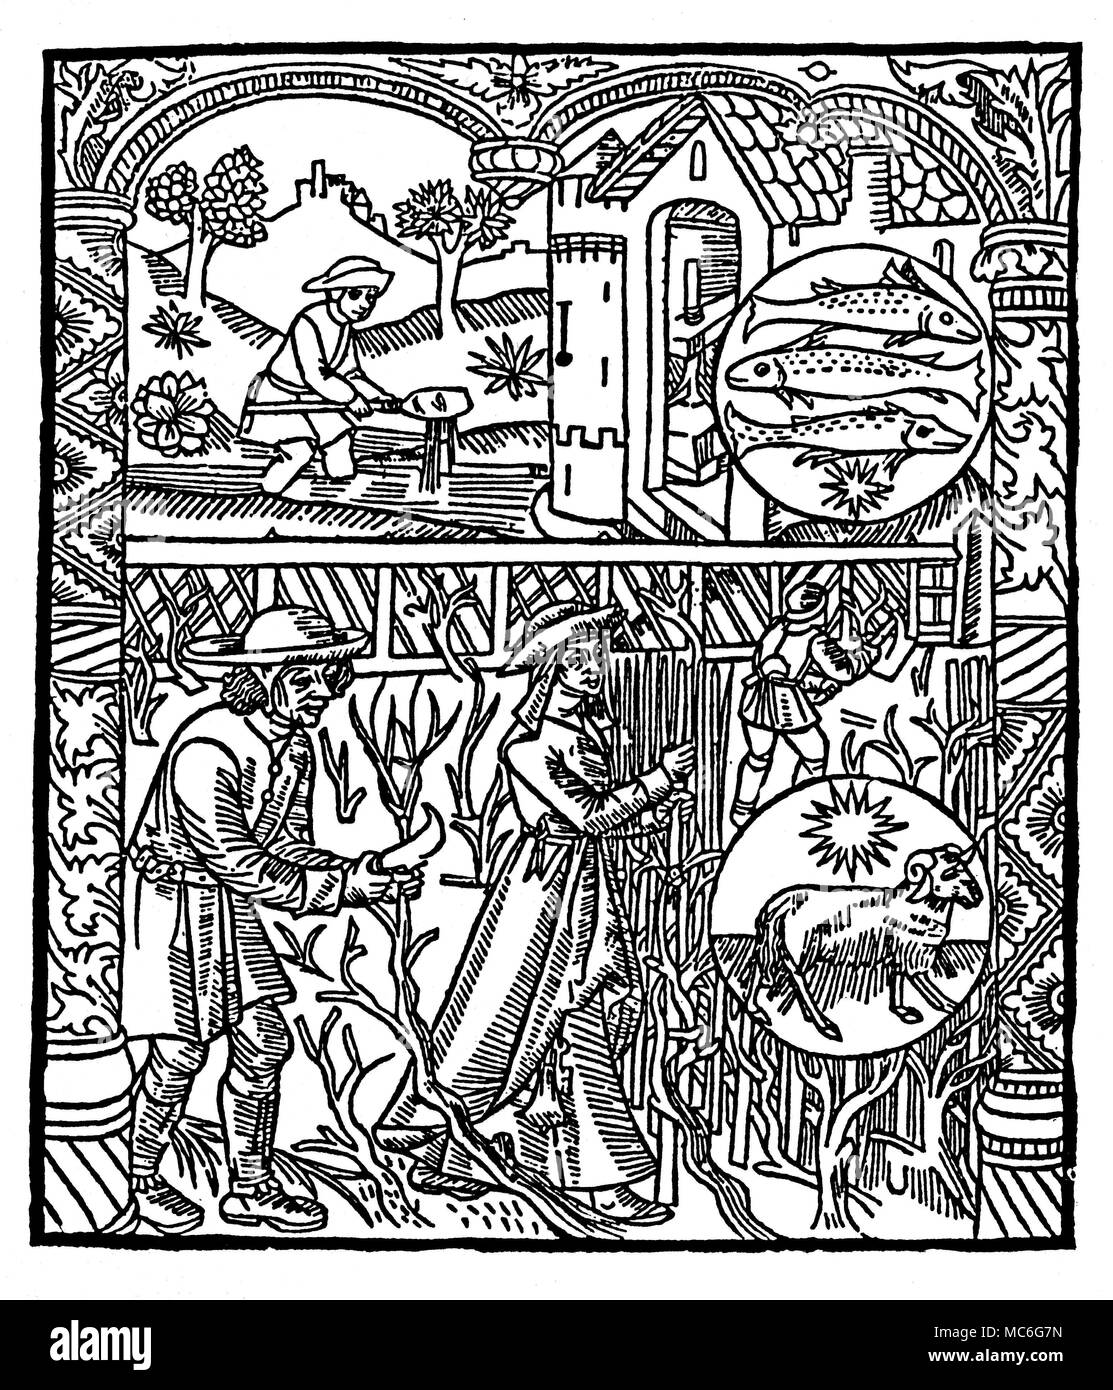 MONTHS - MARCH - PISCES & ARIES Woodcut depicting labourers repairing fences and ditches. The top roundel is the zodiac image for Pisces, with three fishes, in place of the traditional two; the bottom roundel is the image of Aries, the Ram. From Le Grant Kalendrier & compost des Bergiers avecq leur Astrologie, circa 1500. Stock Photo